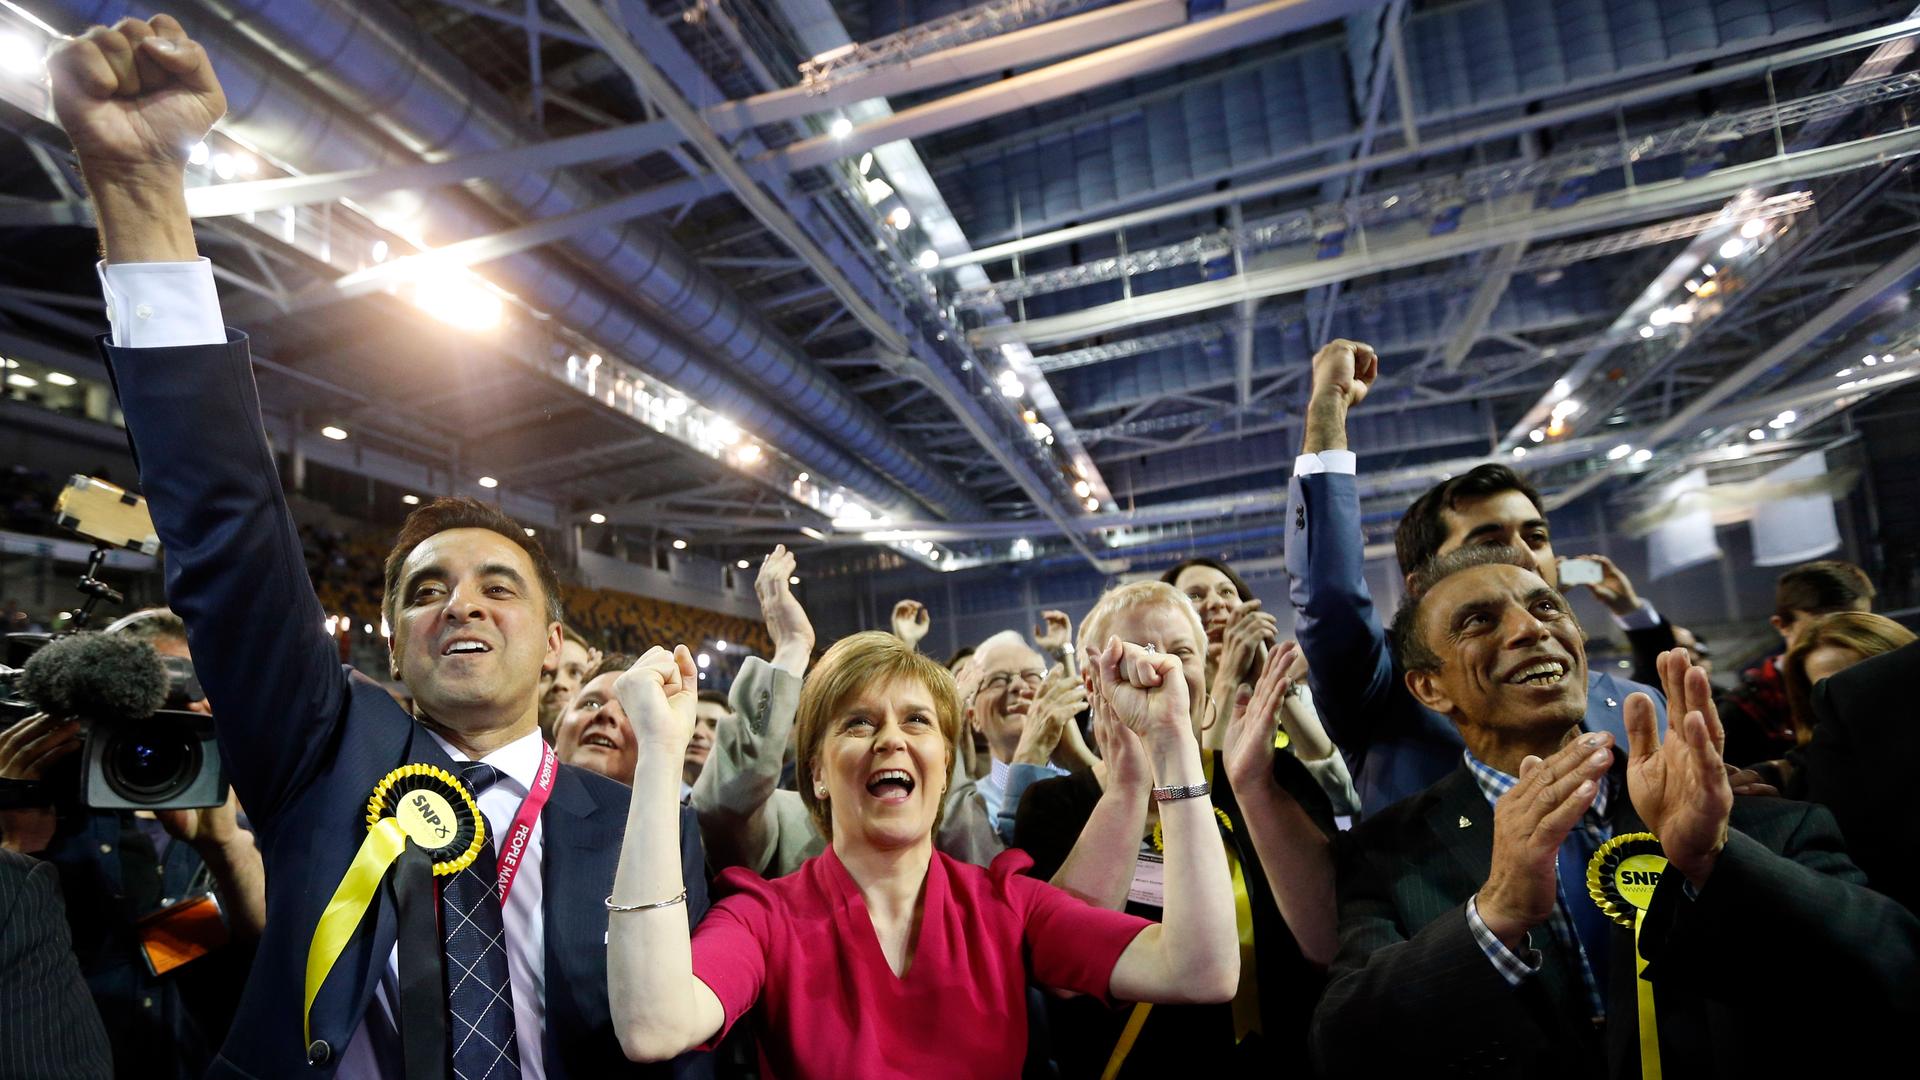 Nicola Sturgeon, leader of the Scottish National Party, reacts to election results at a counting center in Glasgow, Scotland, on May 8, 2015.